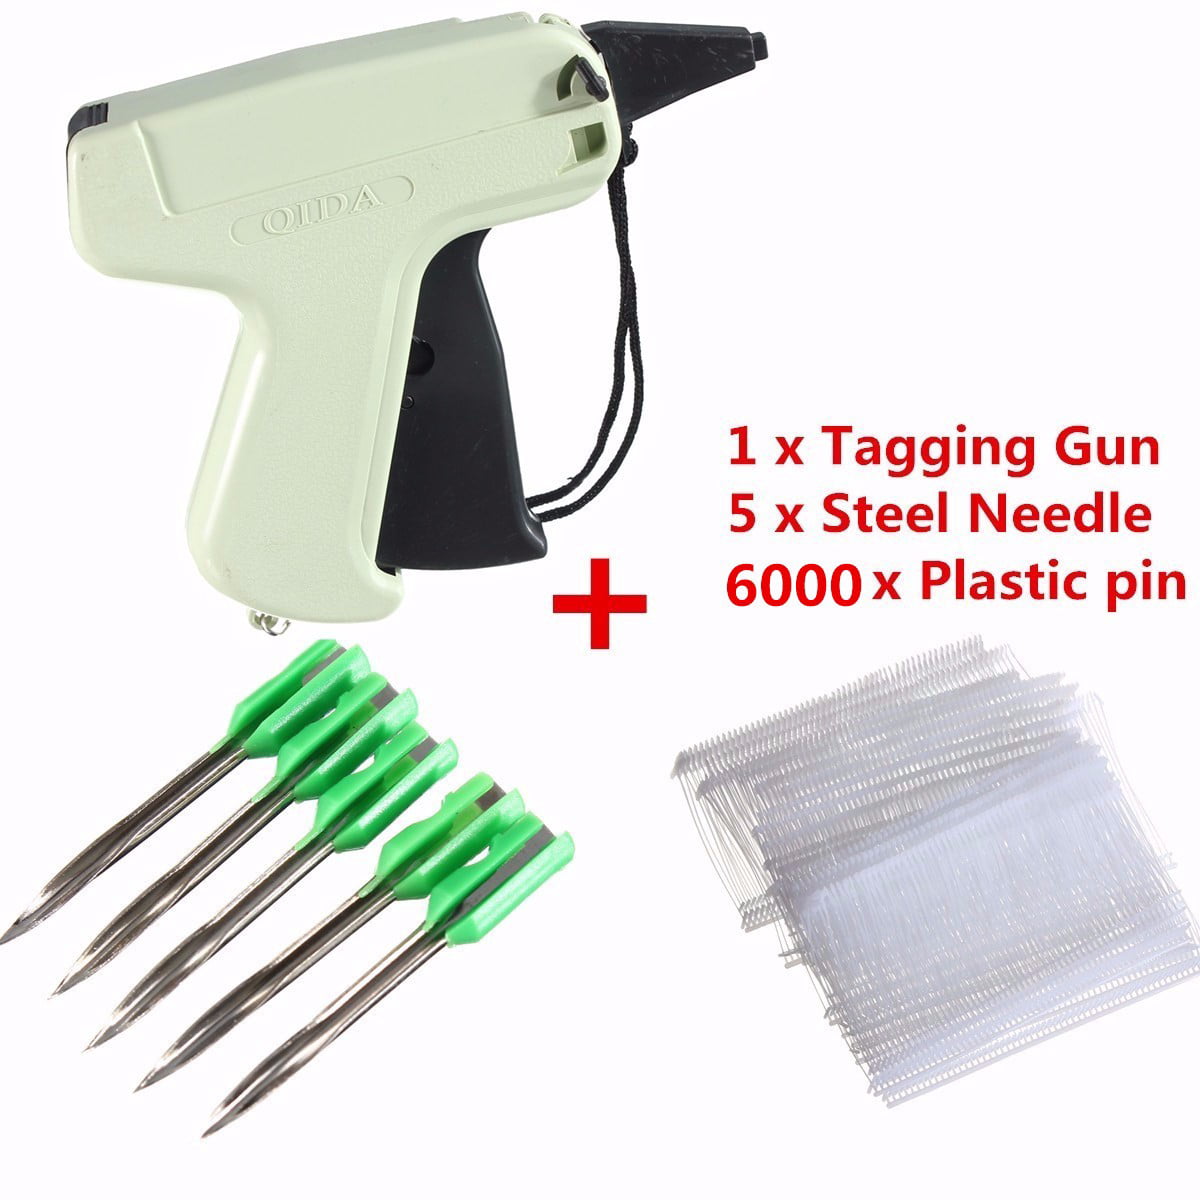 5pcs Clothing Price Label Tagging Needle Tag Barb Gun Pierce Clothes Tool Attach 